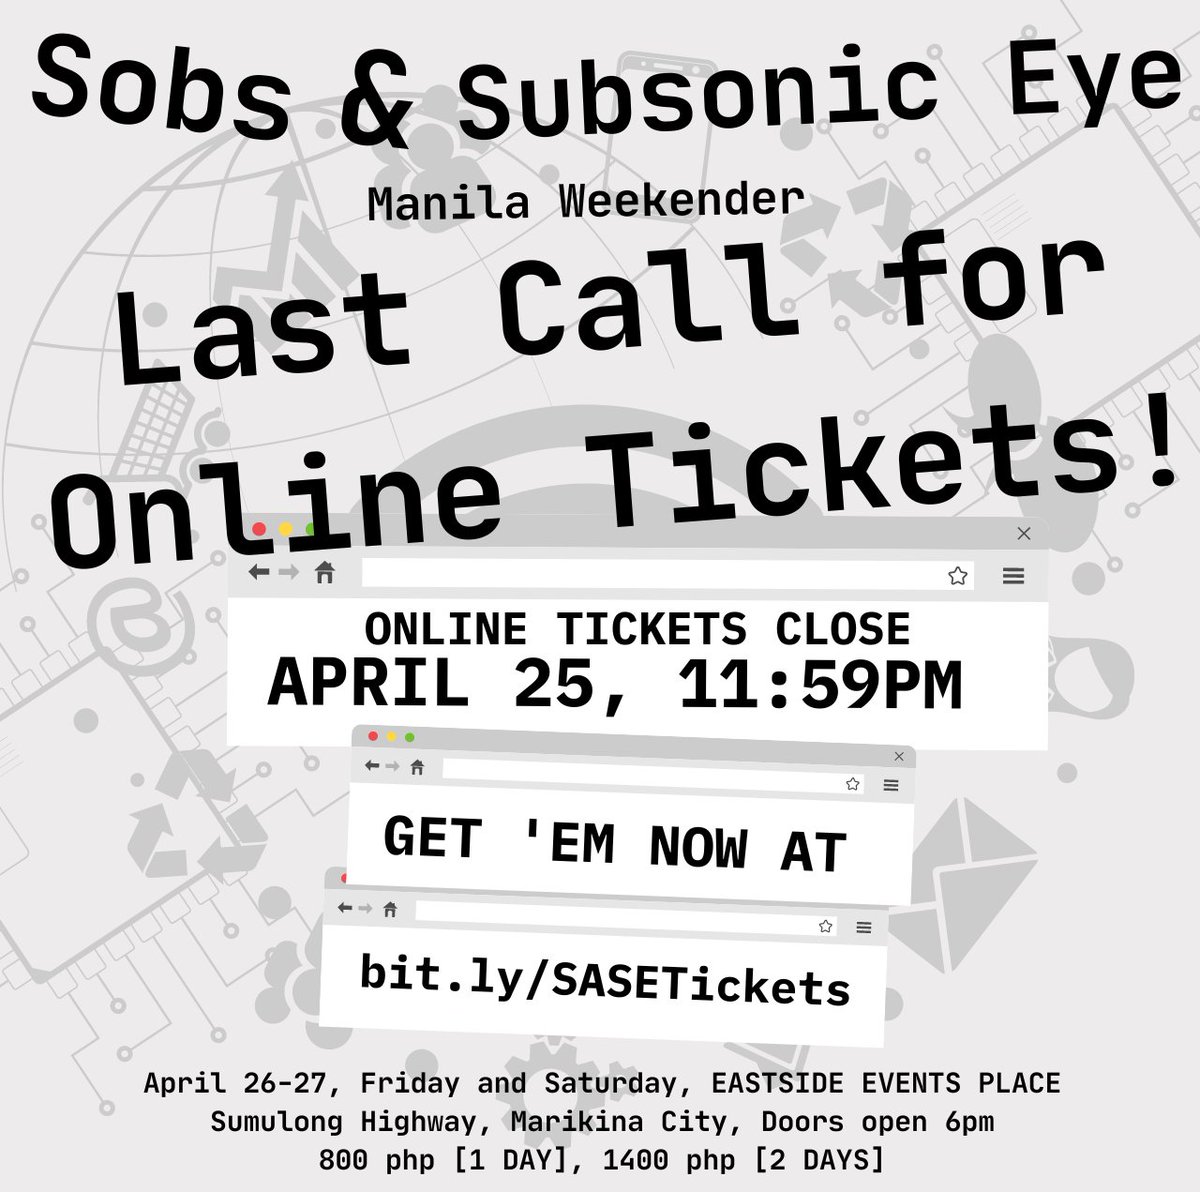 ‼️ LAST CALL FOR ONLINE TICKETS ‼️ Time is running out, don't miss out. 💻🏃‍♂️ Online ticket form for the Sobs and Subsonic Eye Manila Weekenser will close TONIGHT, April 25 at 11:59pm. Walk ins (800 PHP) will be very limited, so get your tickets now via bit.ly/SASETickets